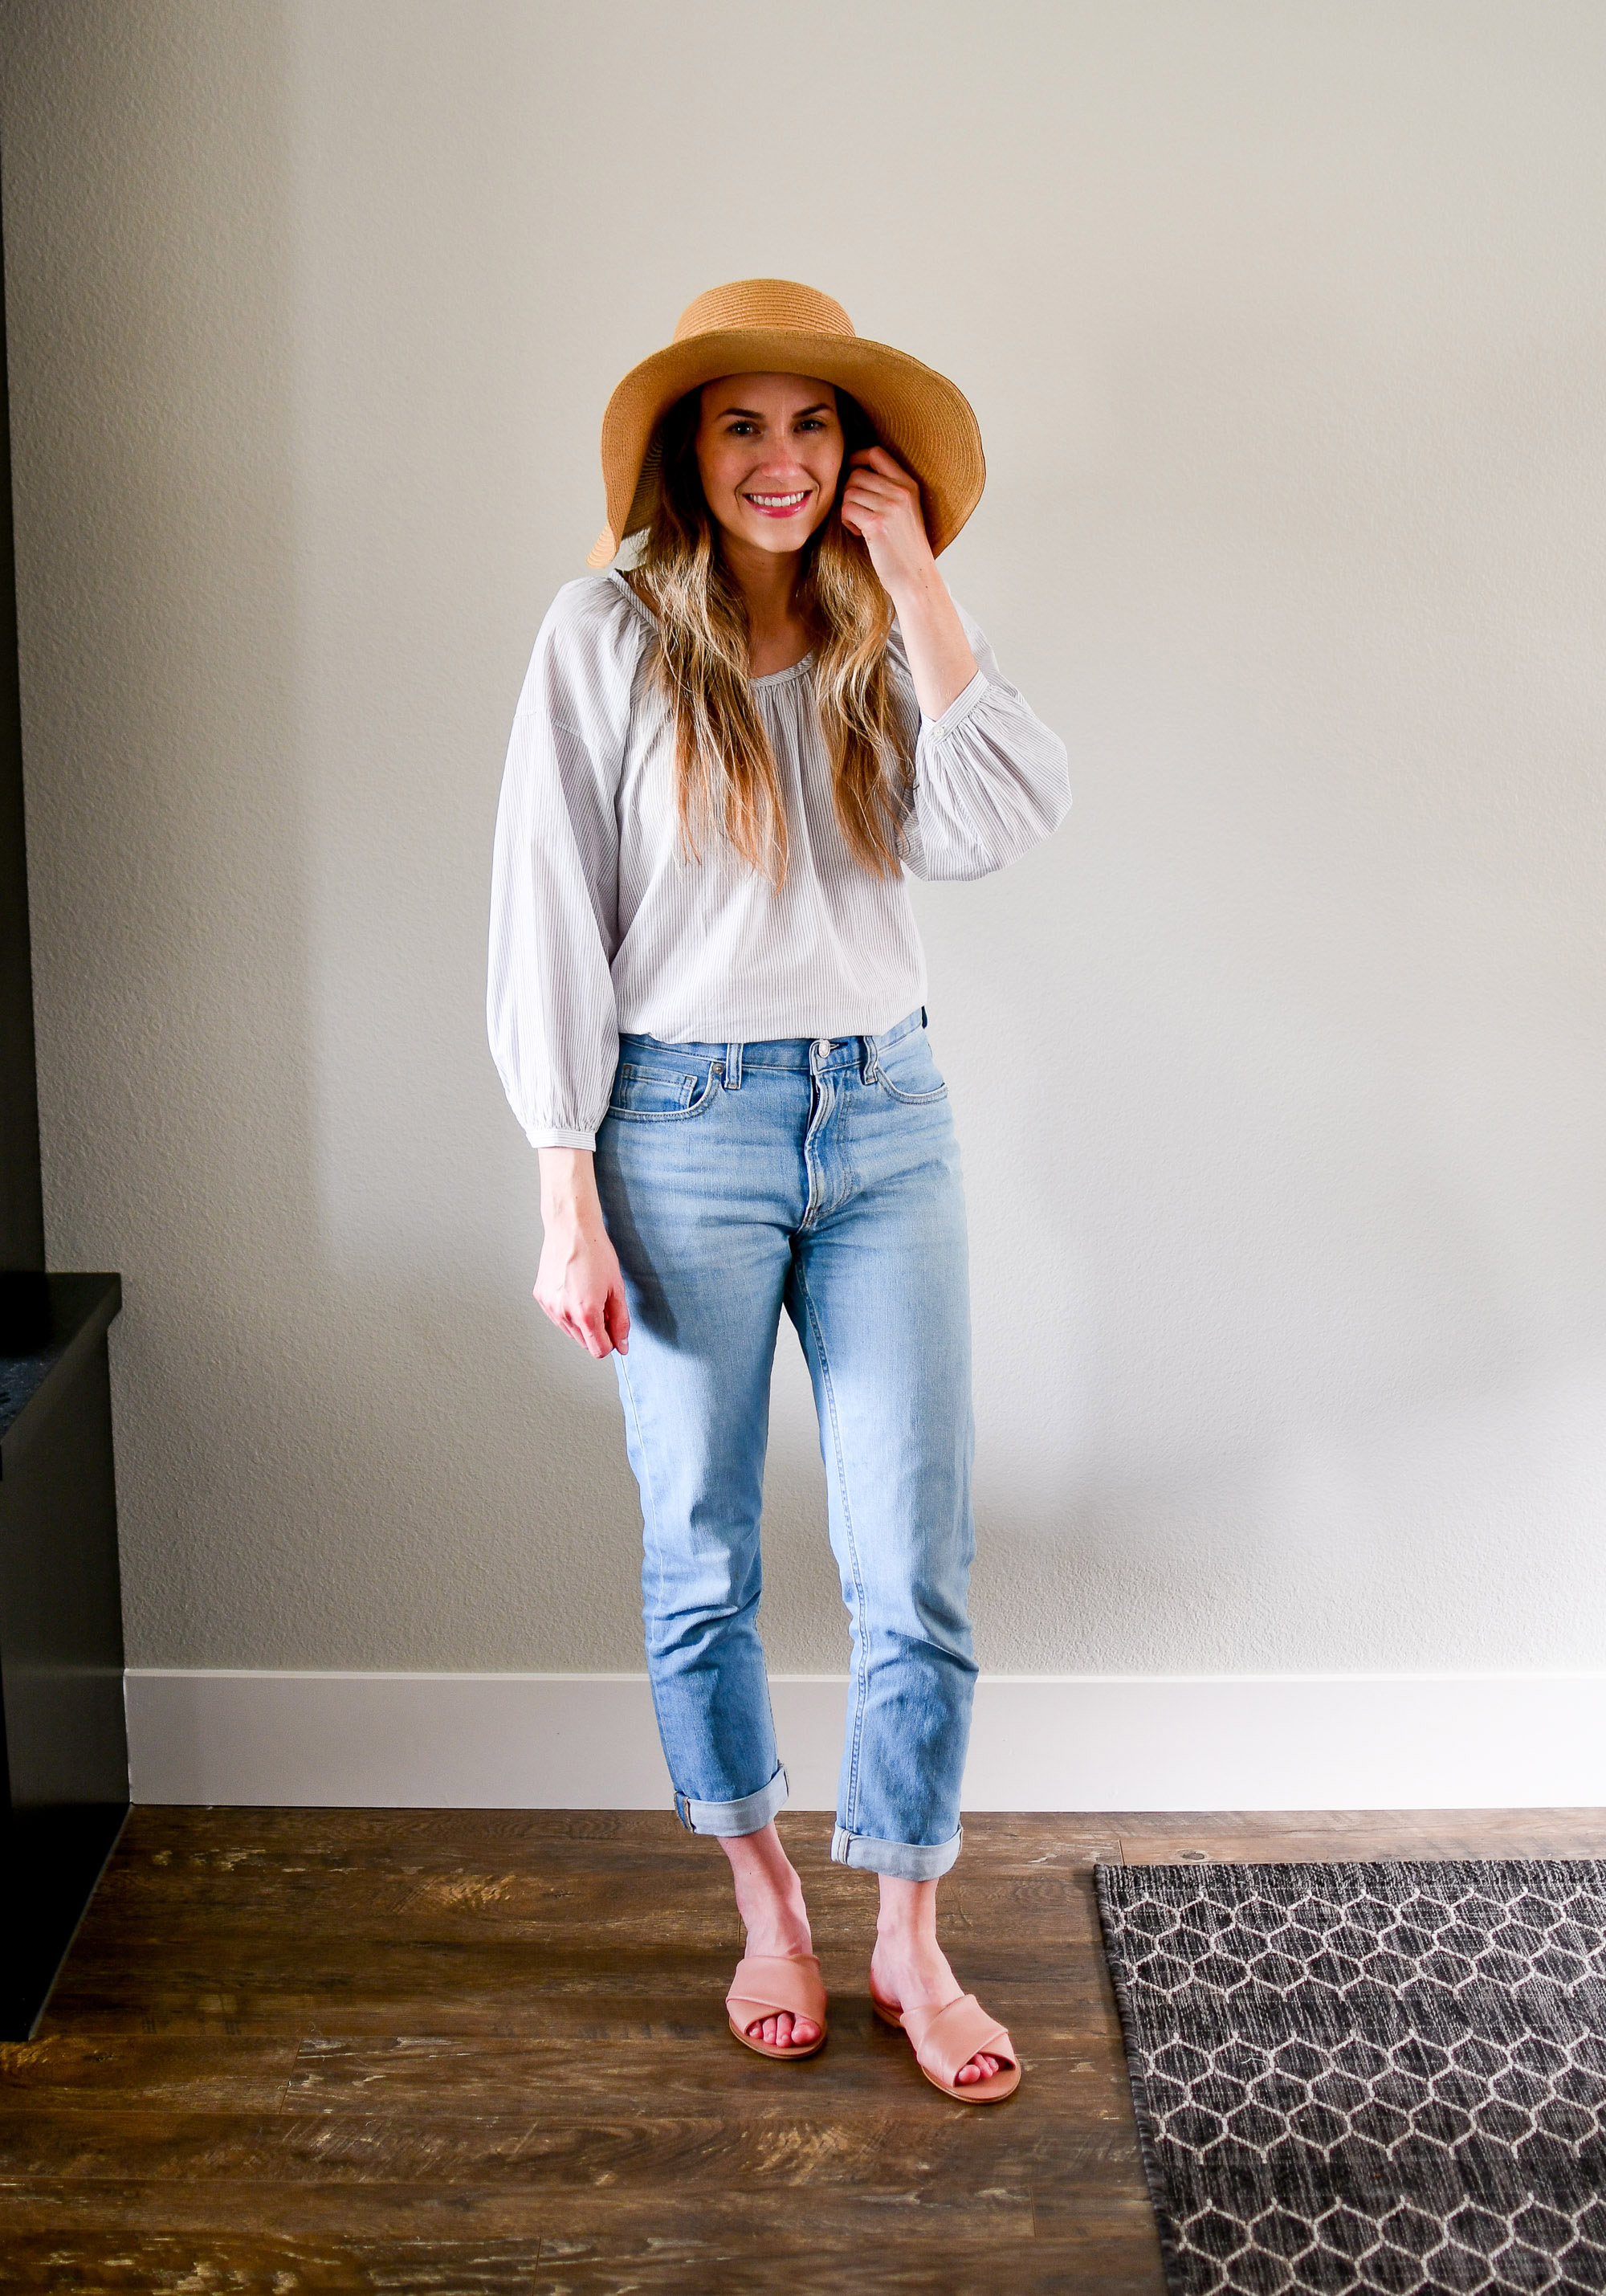 Casual Everlane outfit with air ruched blouse, modern boyfriend jeans, day crossover sandal — Cotton Cashmere Cat Hair